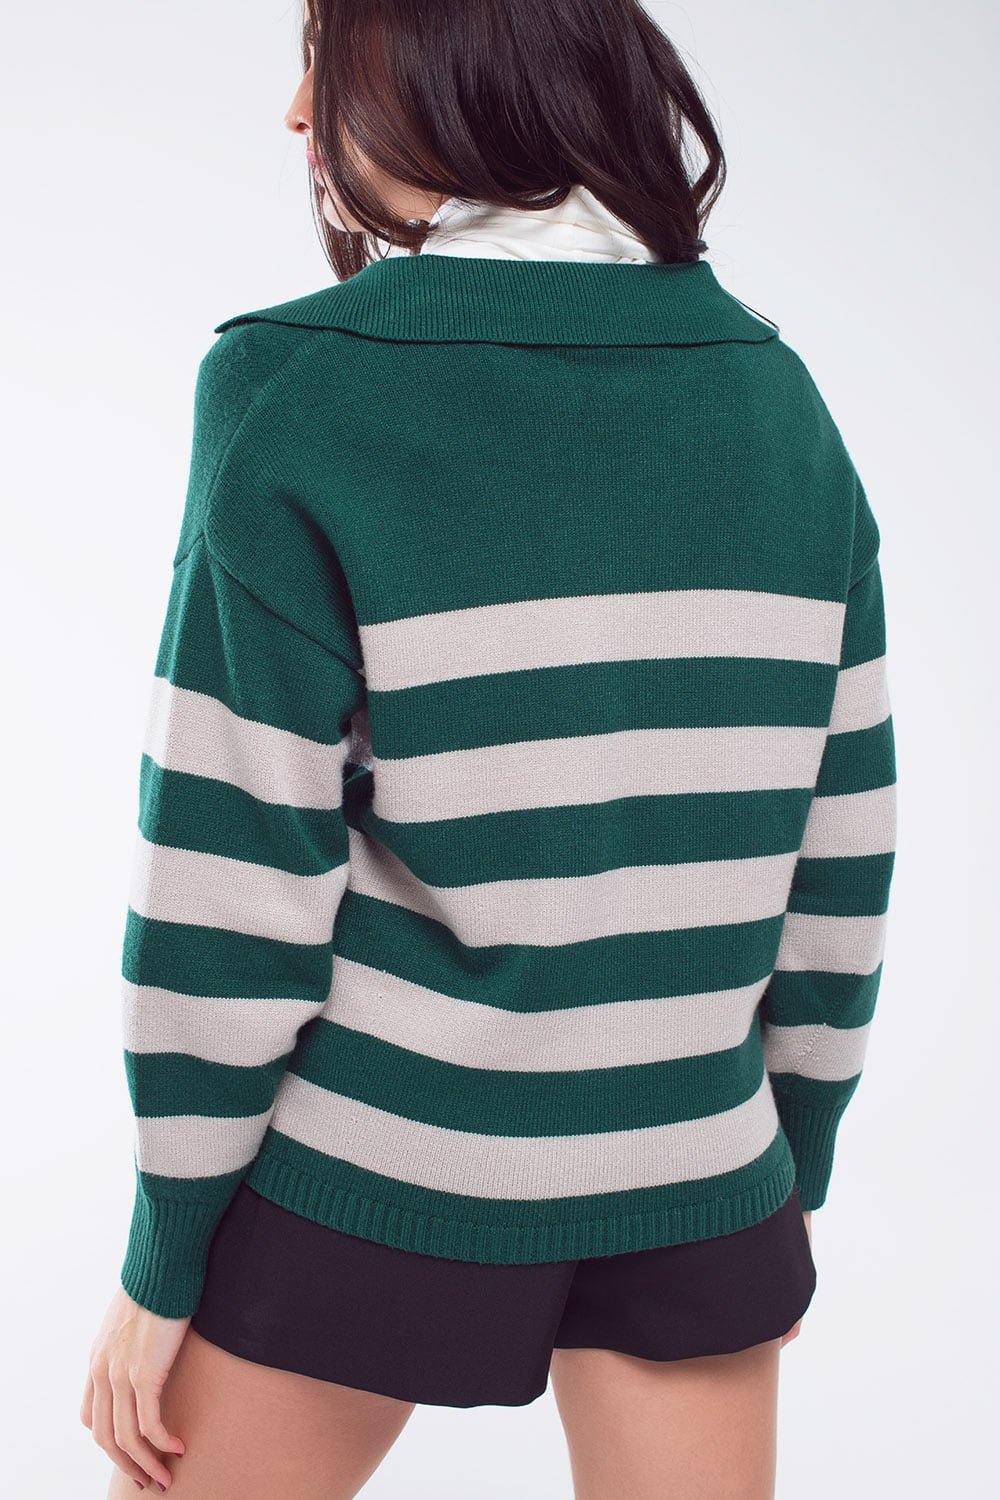 Green and White Striped Sweater With v Neck and Polo Collar - Mack & Harvie